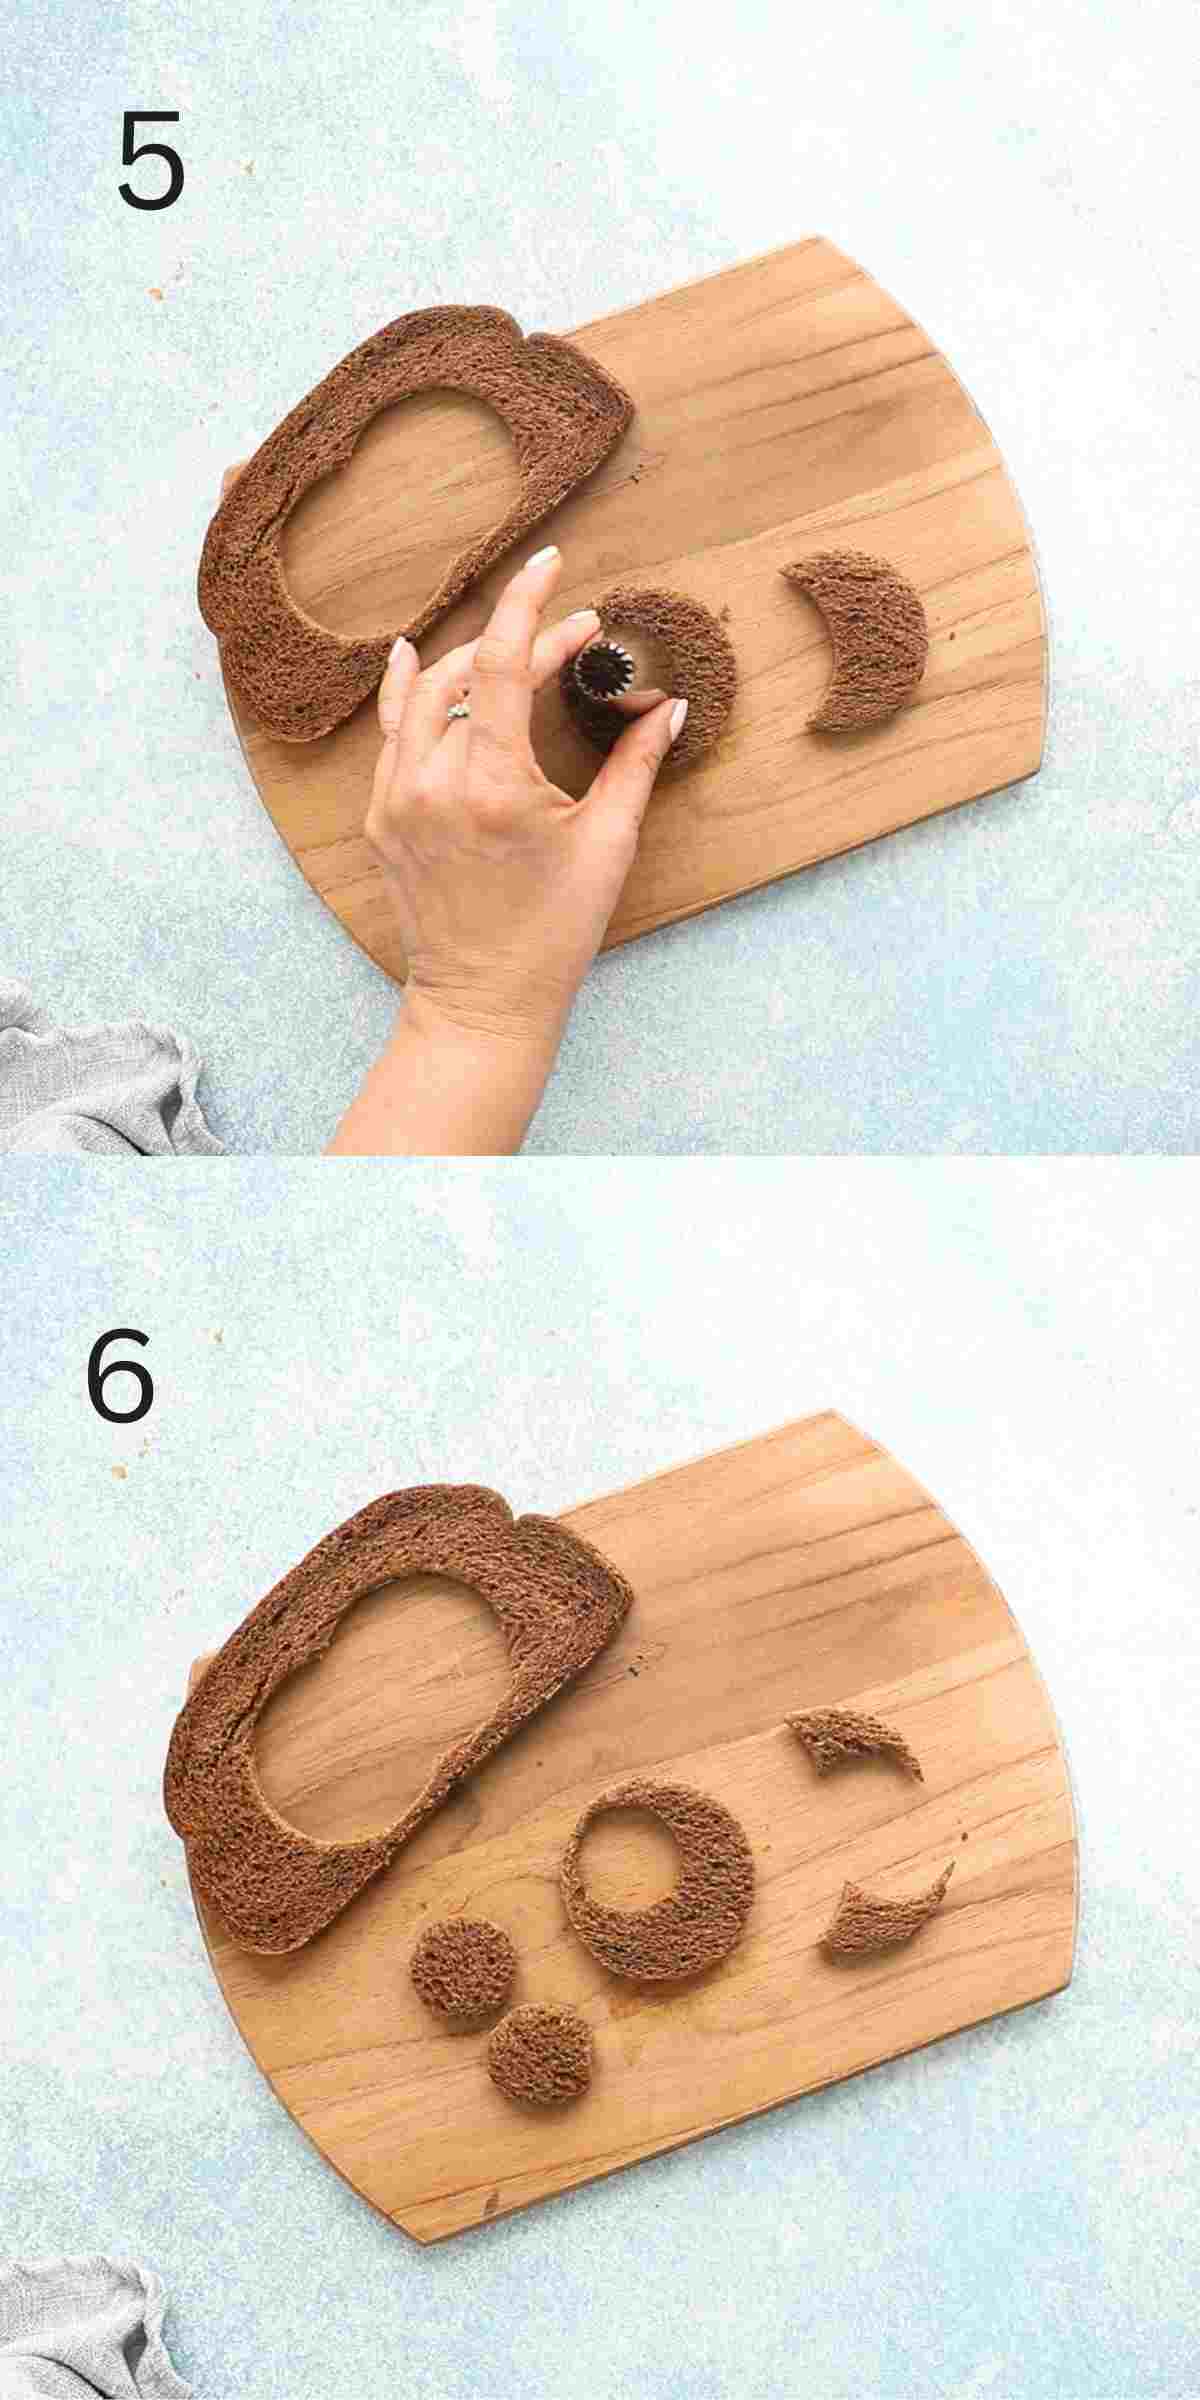 2 photo collage of a hand punching out shapes from a slice of bread.